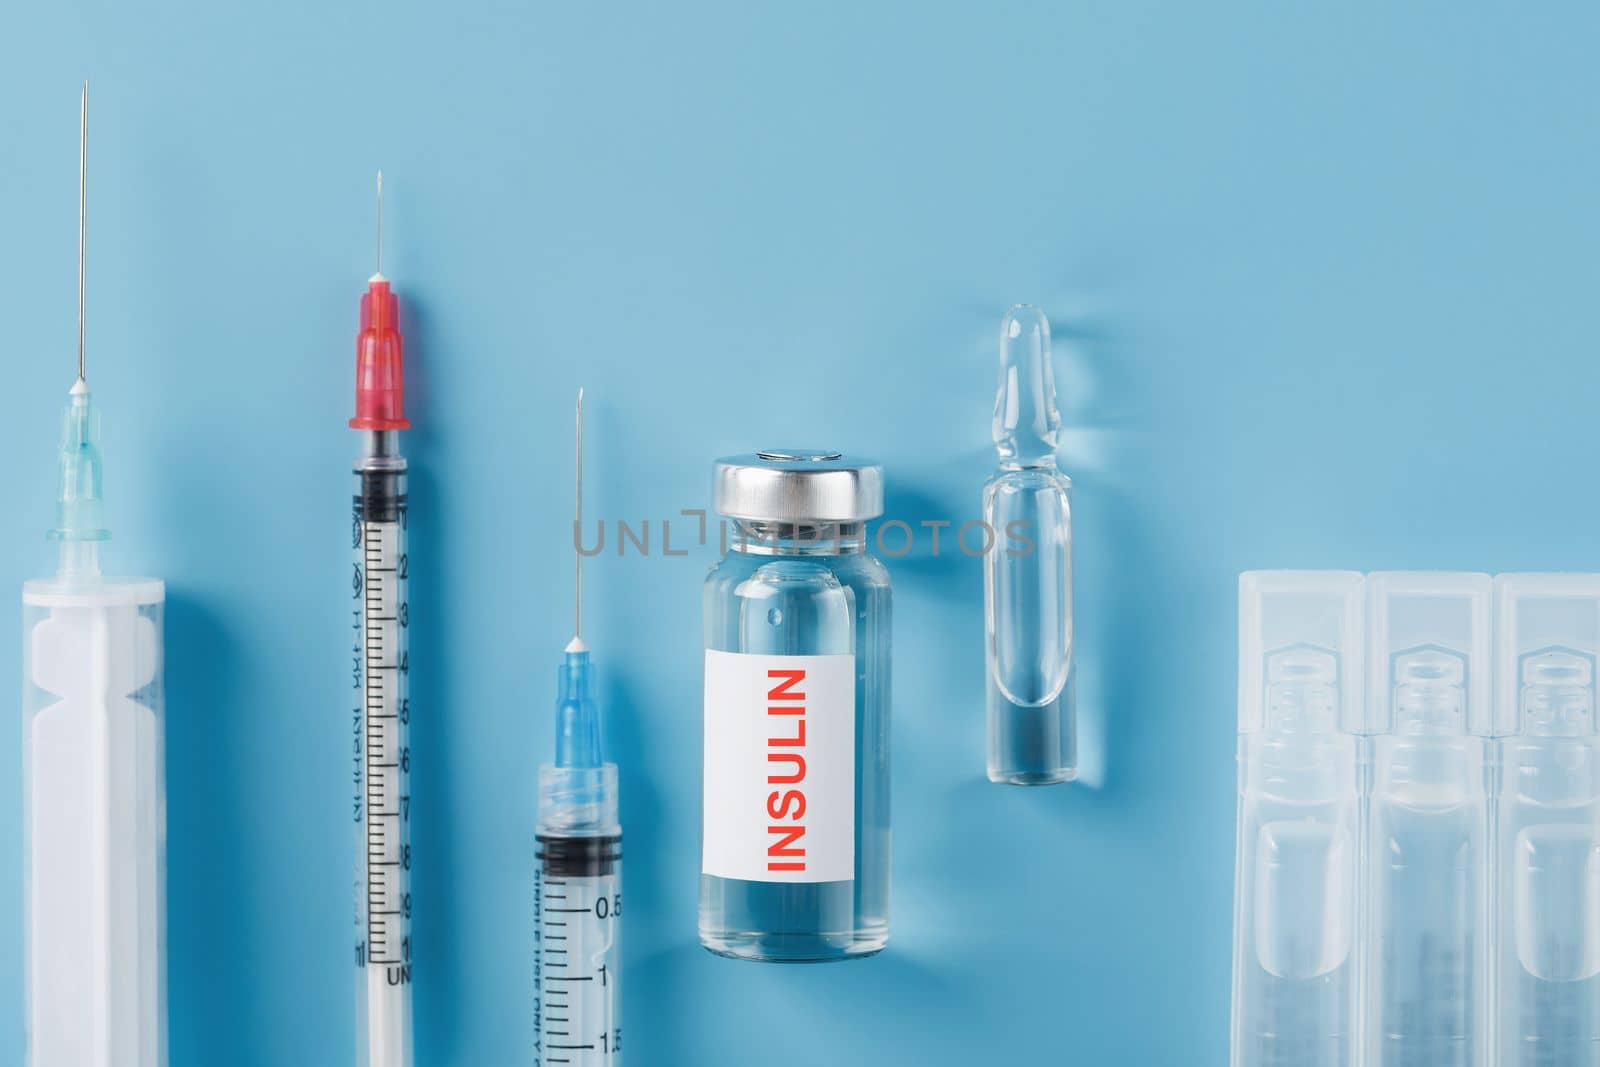 Medicine in ampoules with insulin, needles and syringes for medical subcutaneous injection on a blue background